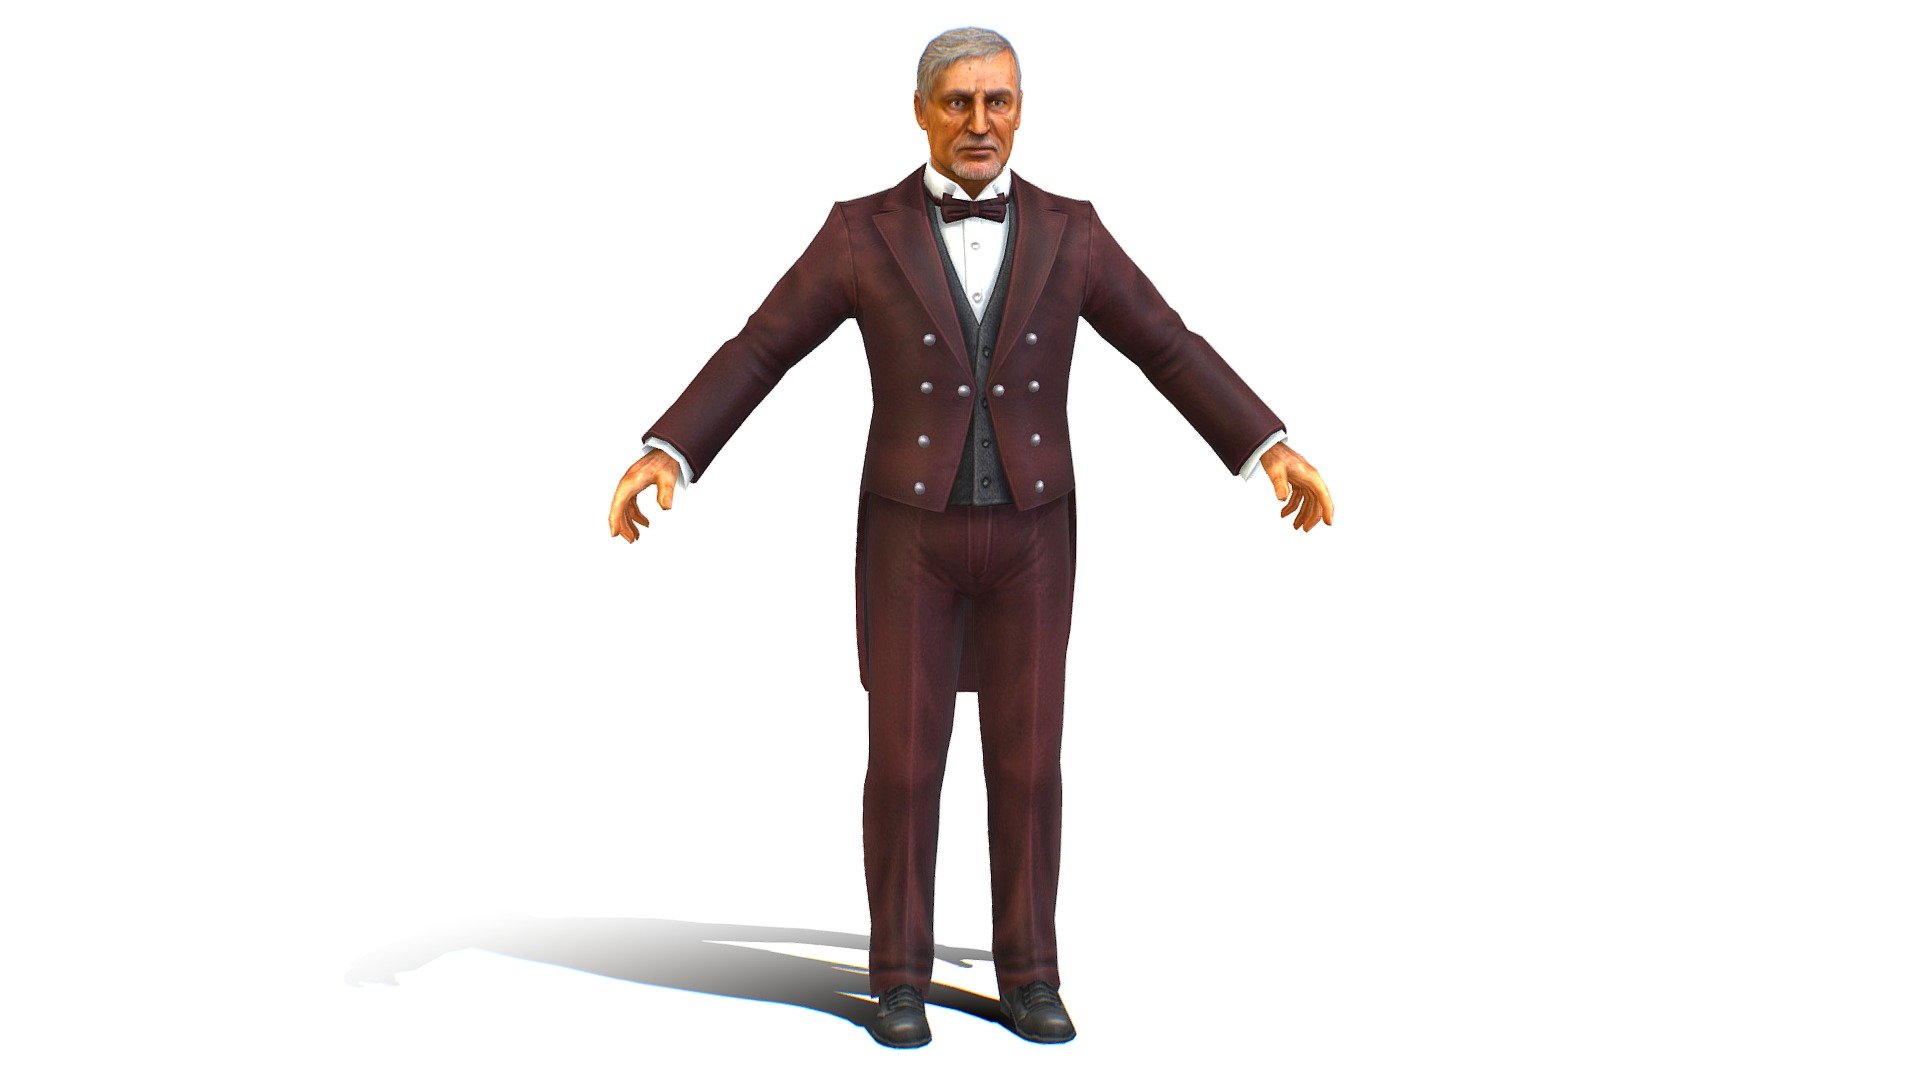 Old Man Concierge in Brown Suit - 3dsMax file included/ texture 512 color only, head and body 3d model